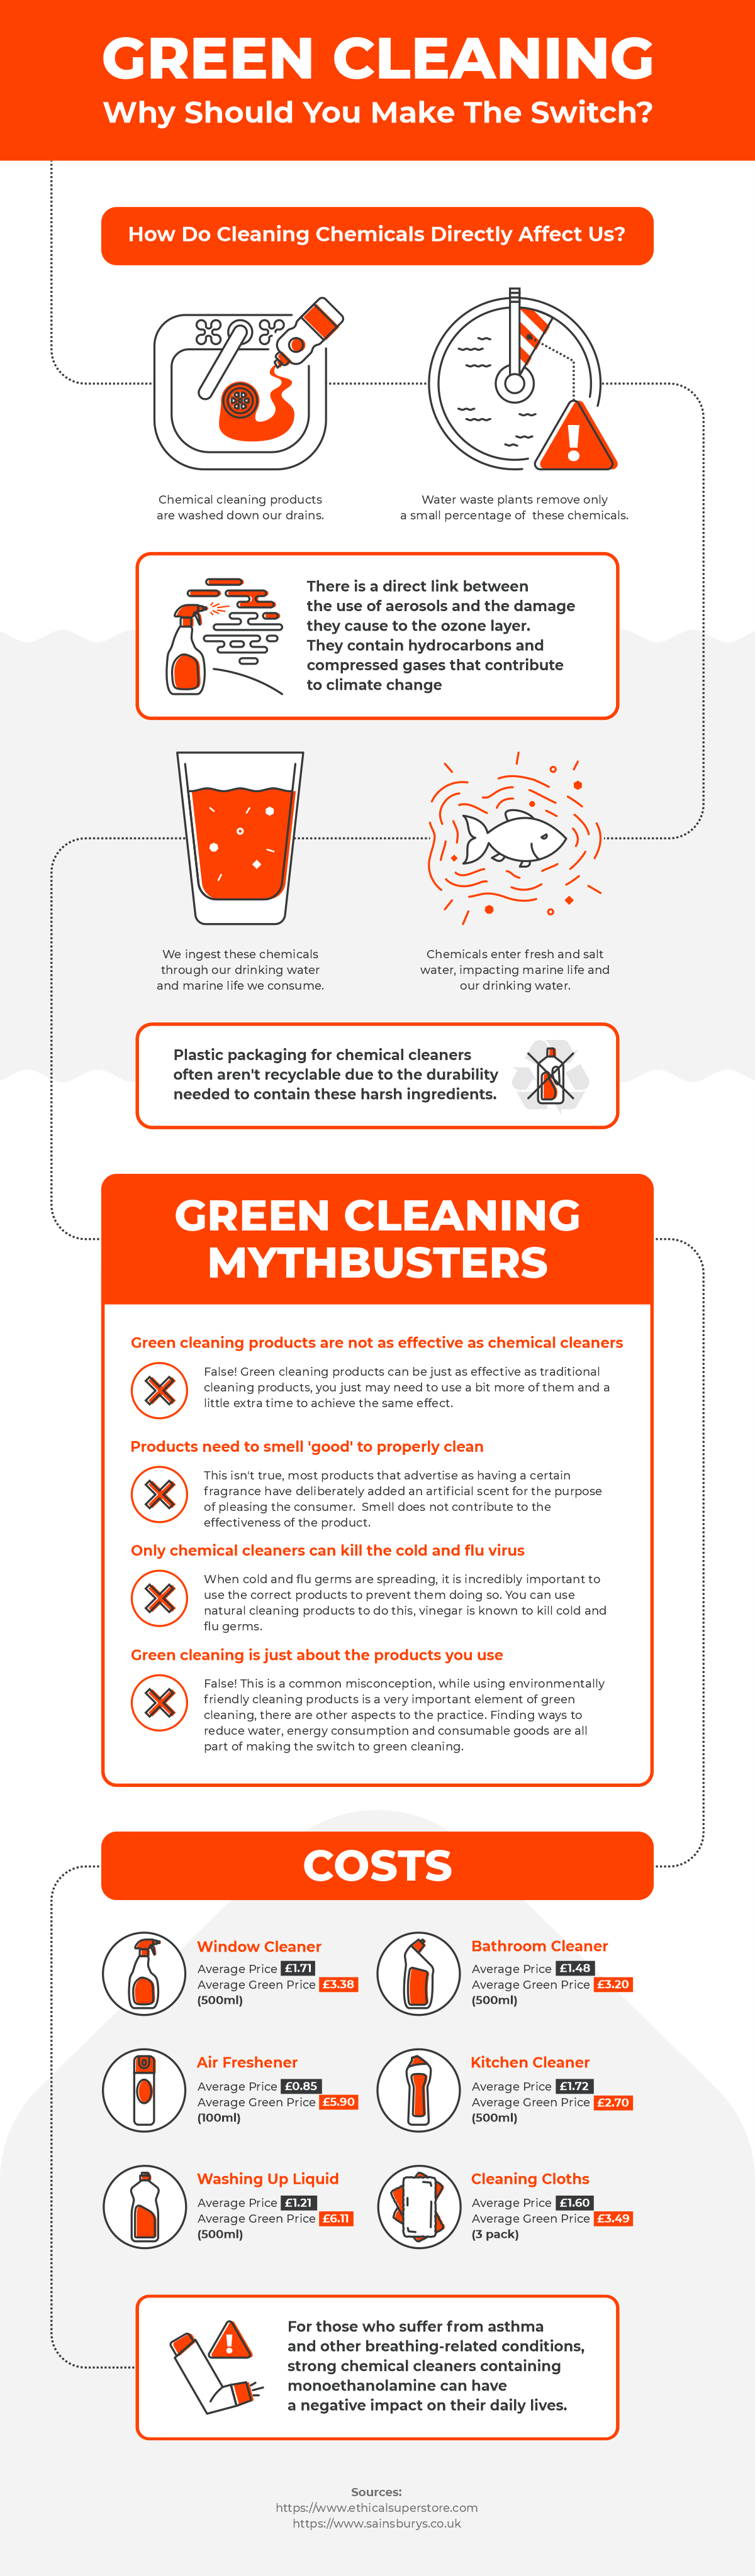 Mythbusters: How Not to Clean Your Toilet